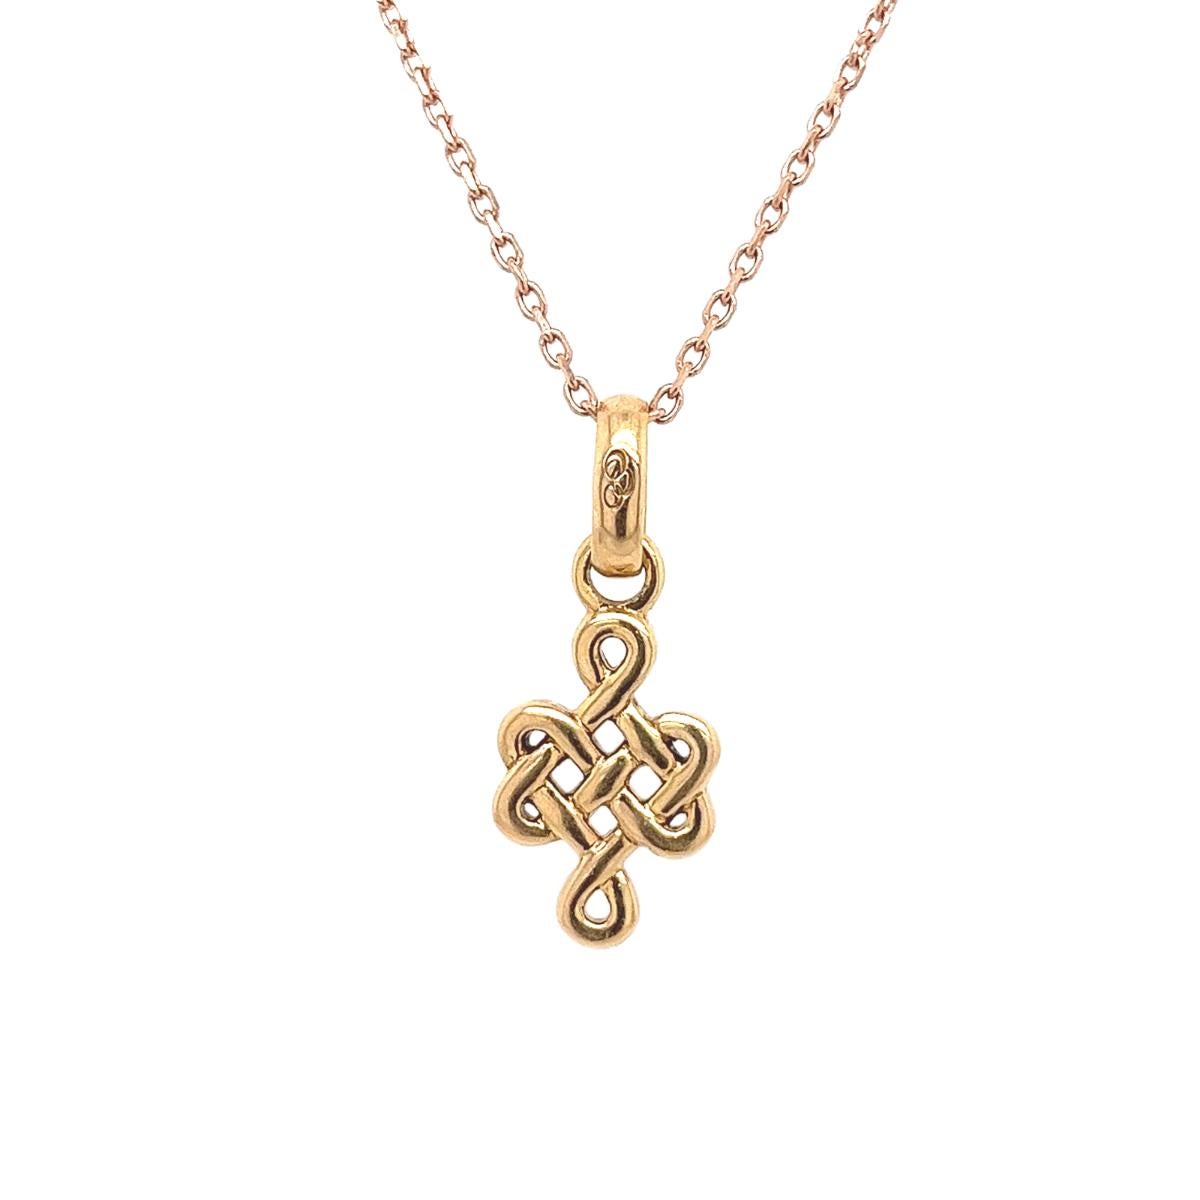 This beautiful Diamond cross pendant is set in 18ct Yellow Gold attached to 17